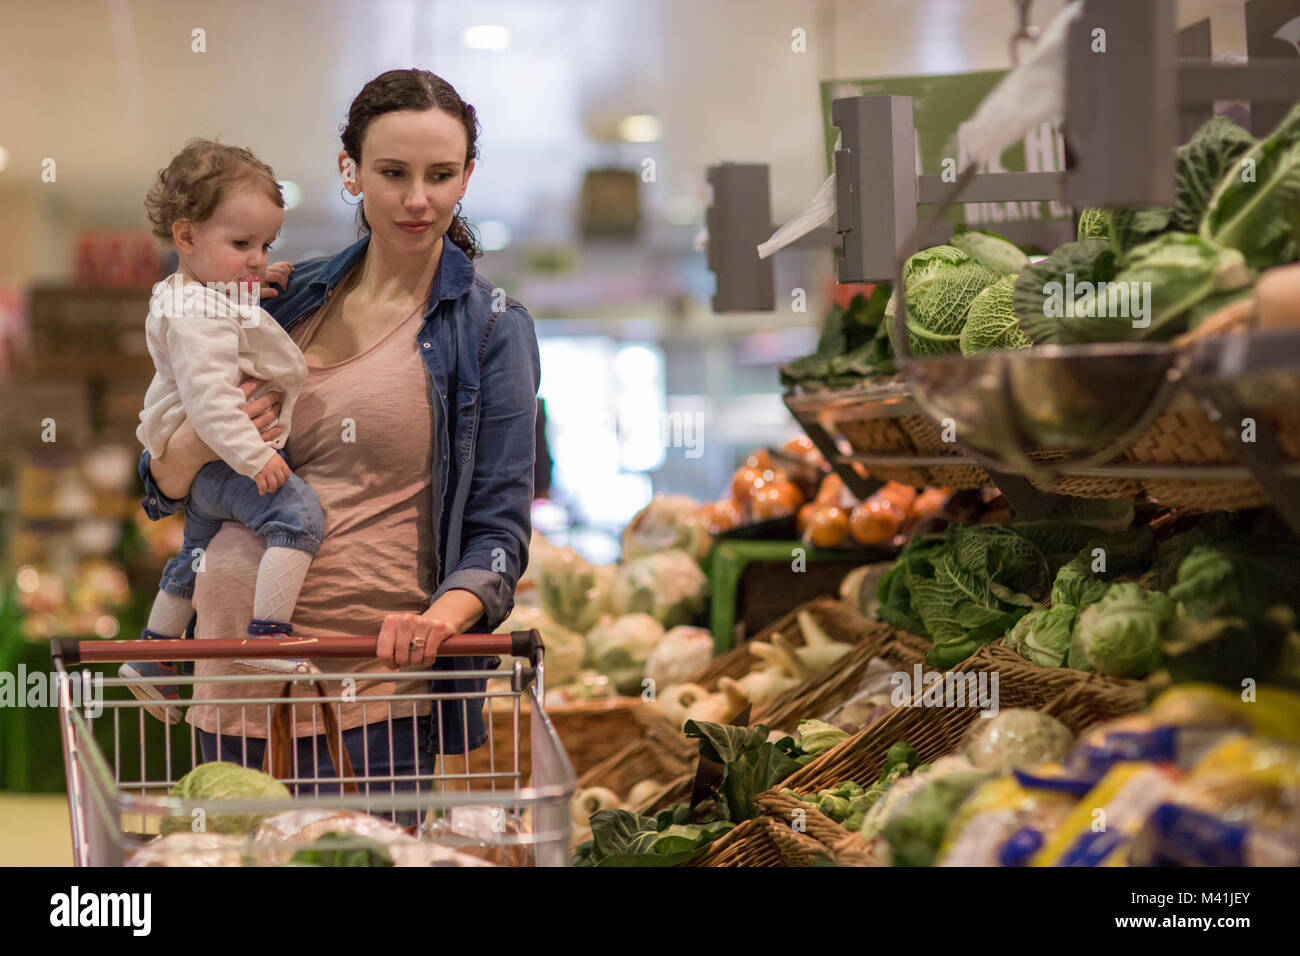 Mother and daughter buying vegetables in grocery store Stock Photo